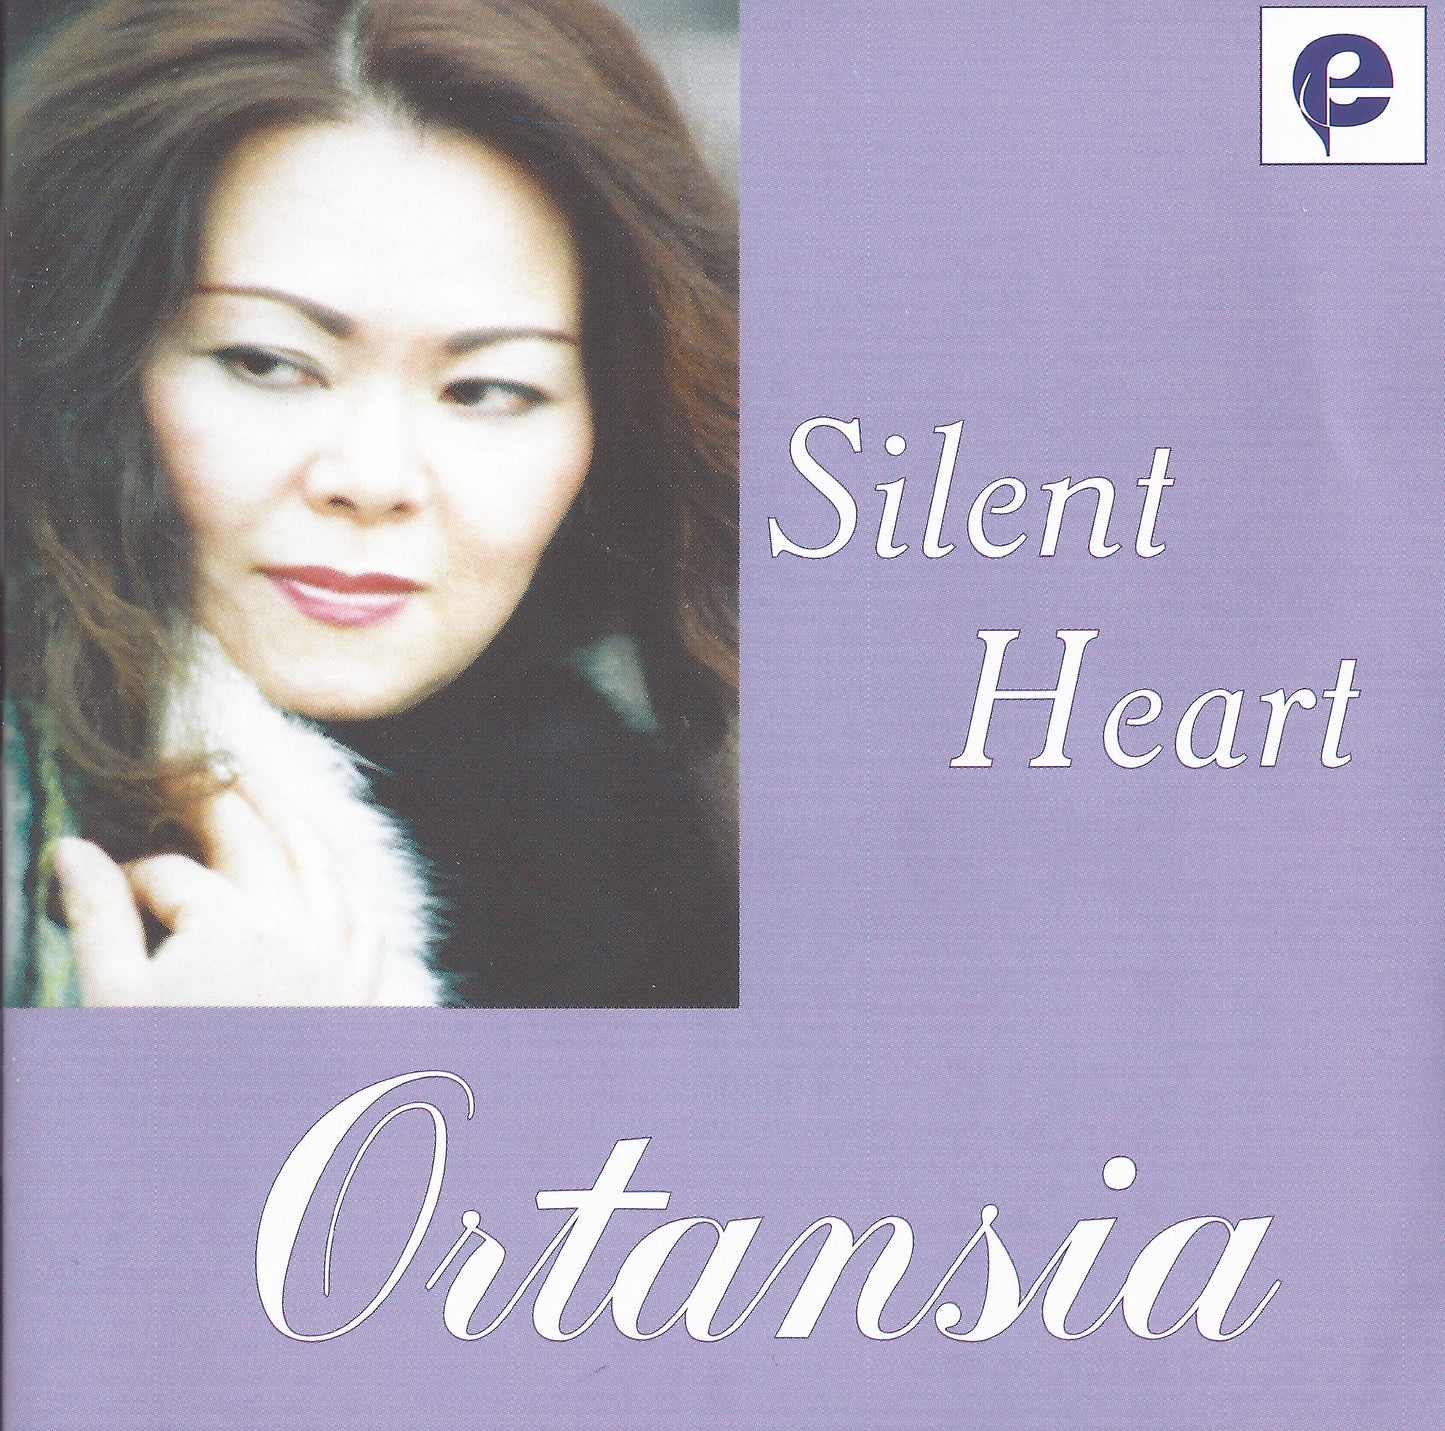 Play a Nocturne for Me - Ortansia